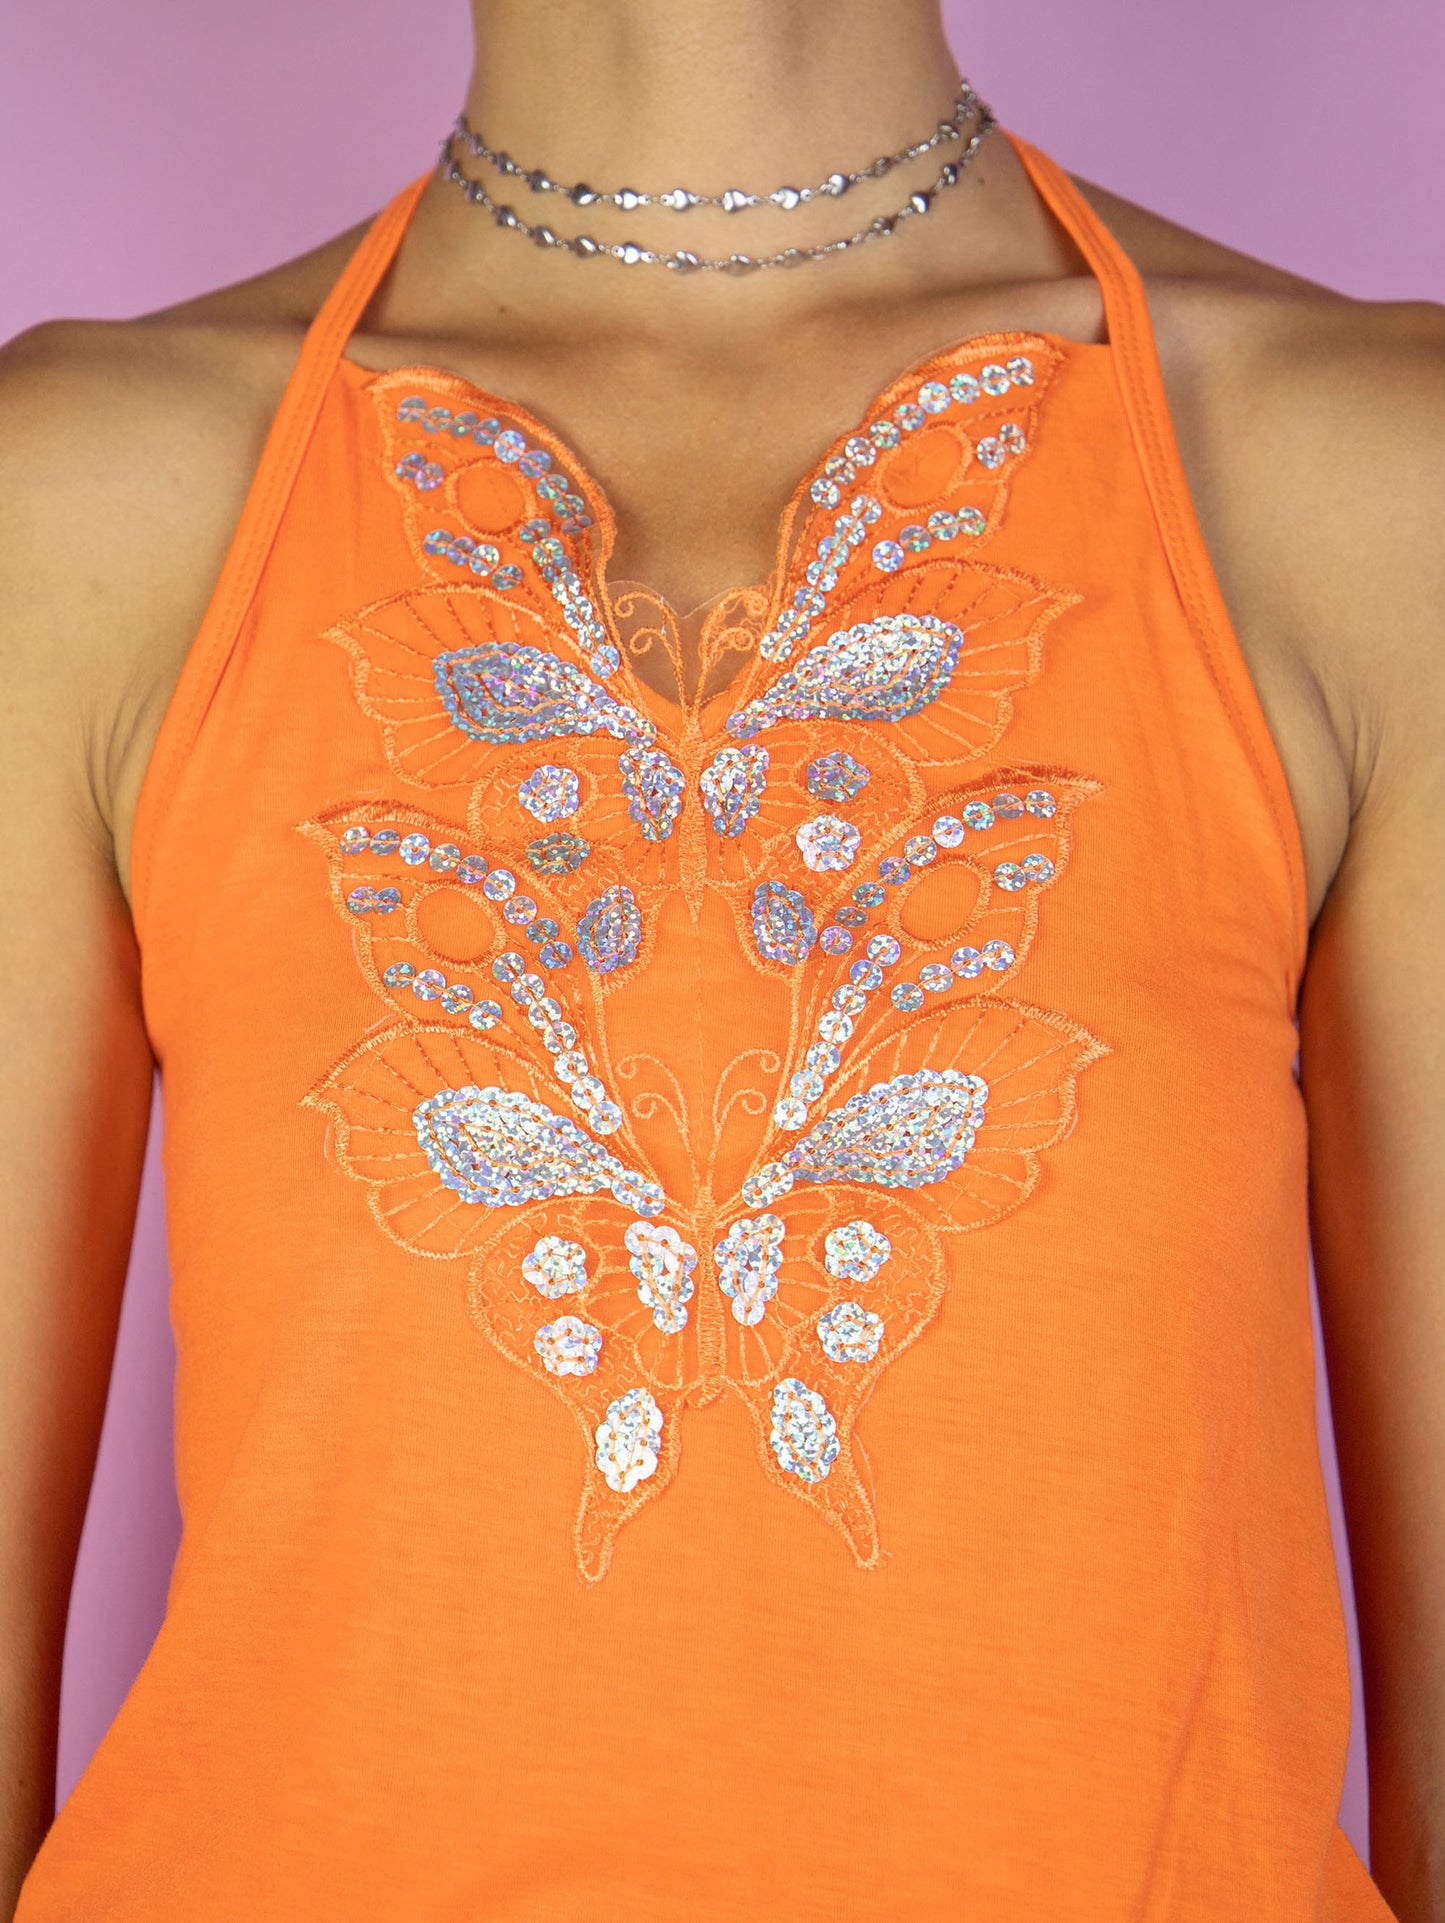 The Y2K Orange Halter Top is a vintage 2000s cyber summer festival butterfly detail halter tie neck top embellished with shiny sparkle silver sequins.